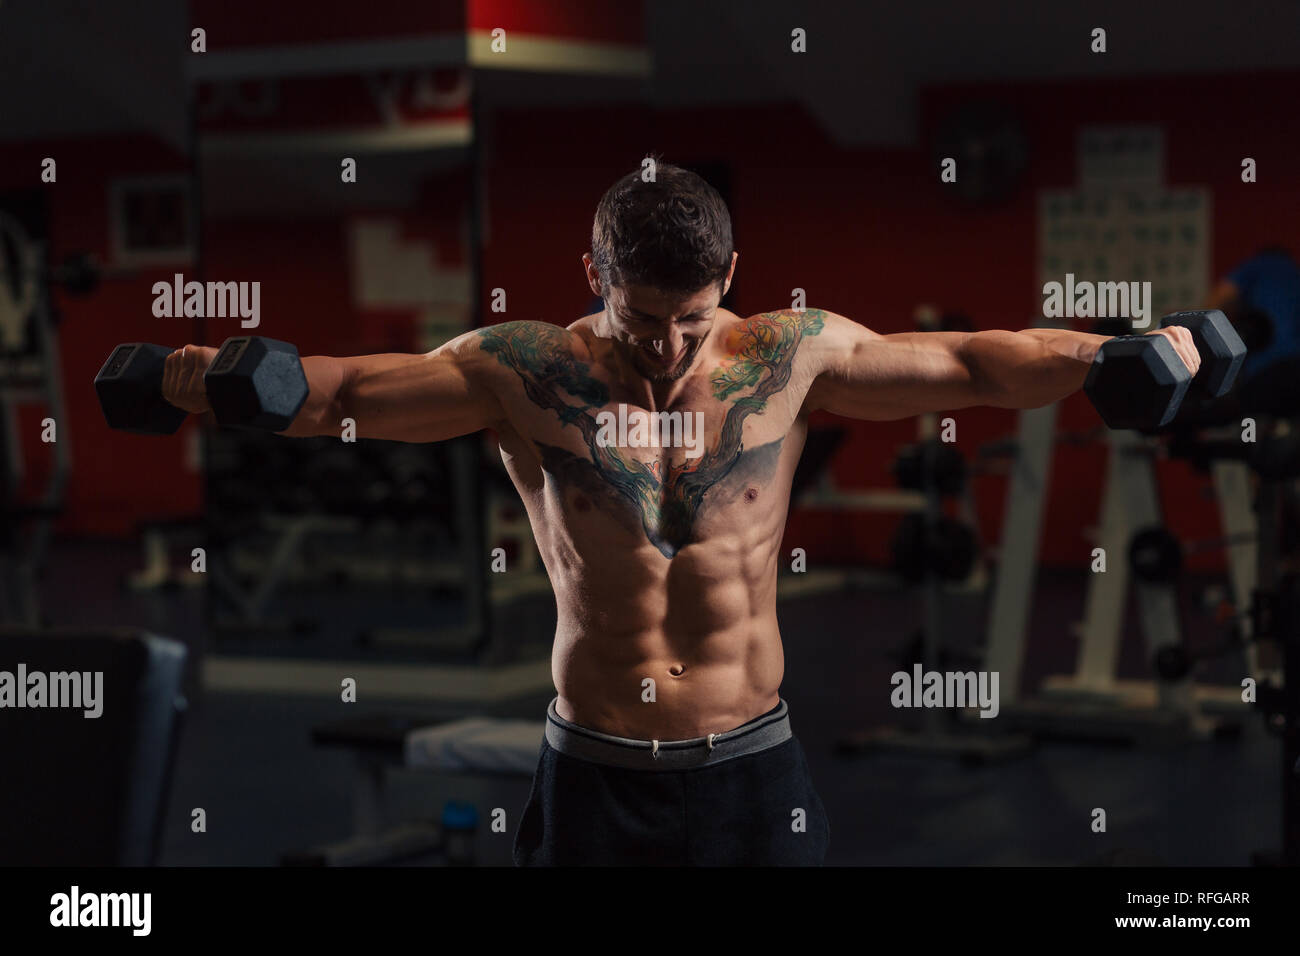 Very fit man with low body fat in the gym doing dumbbell shoulders exercise Stock Photo